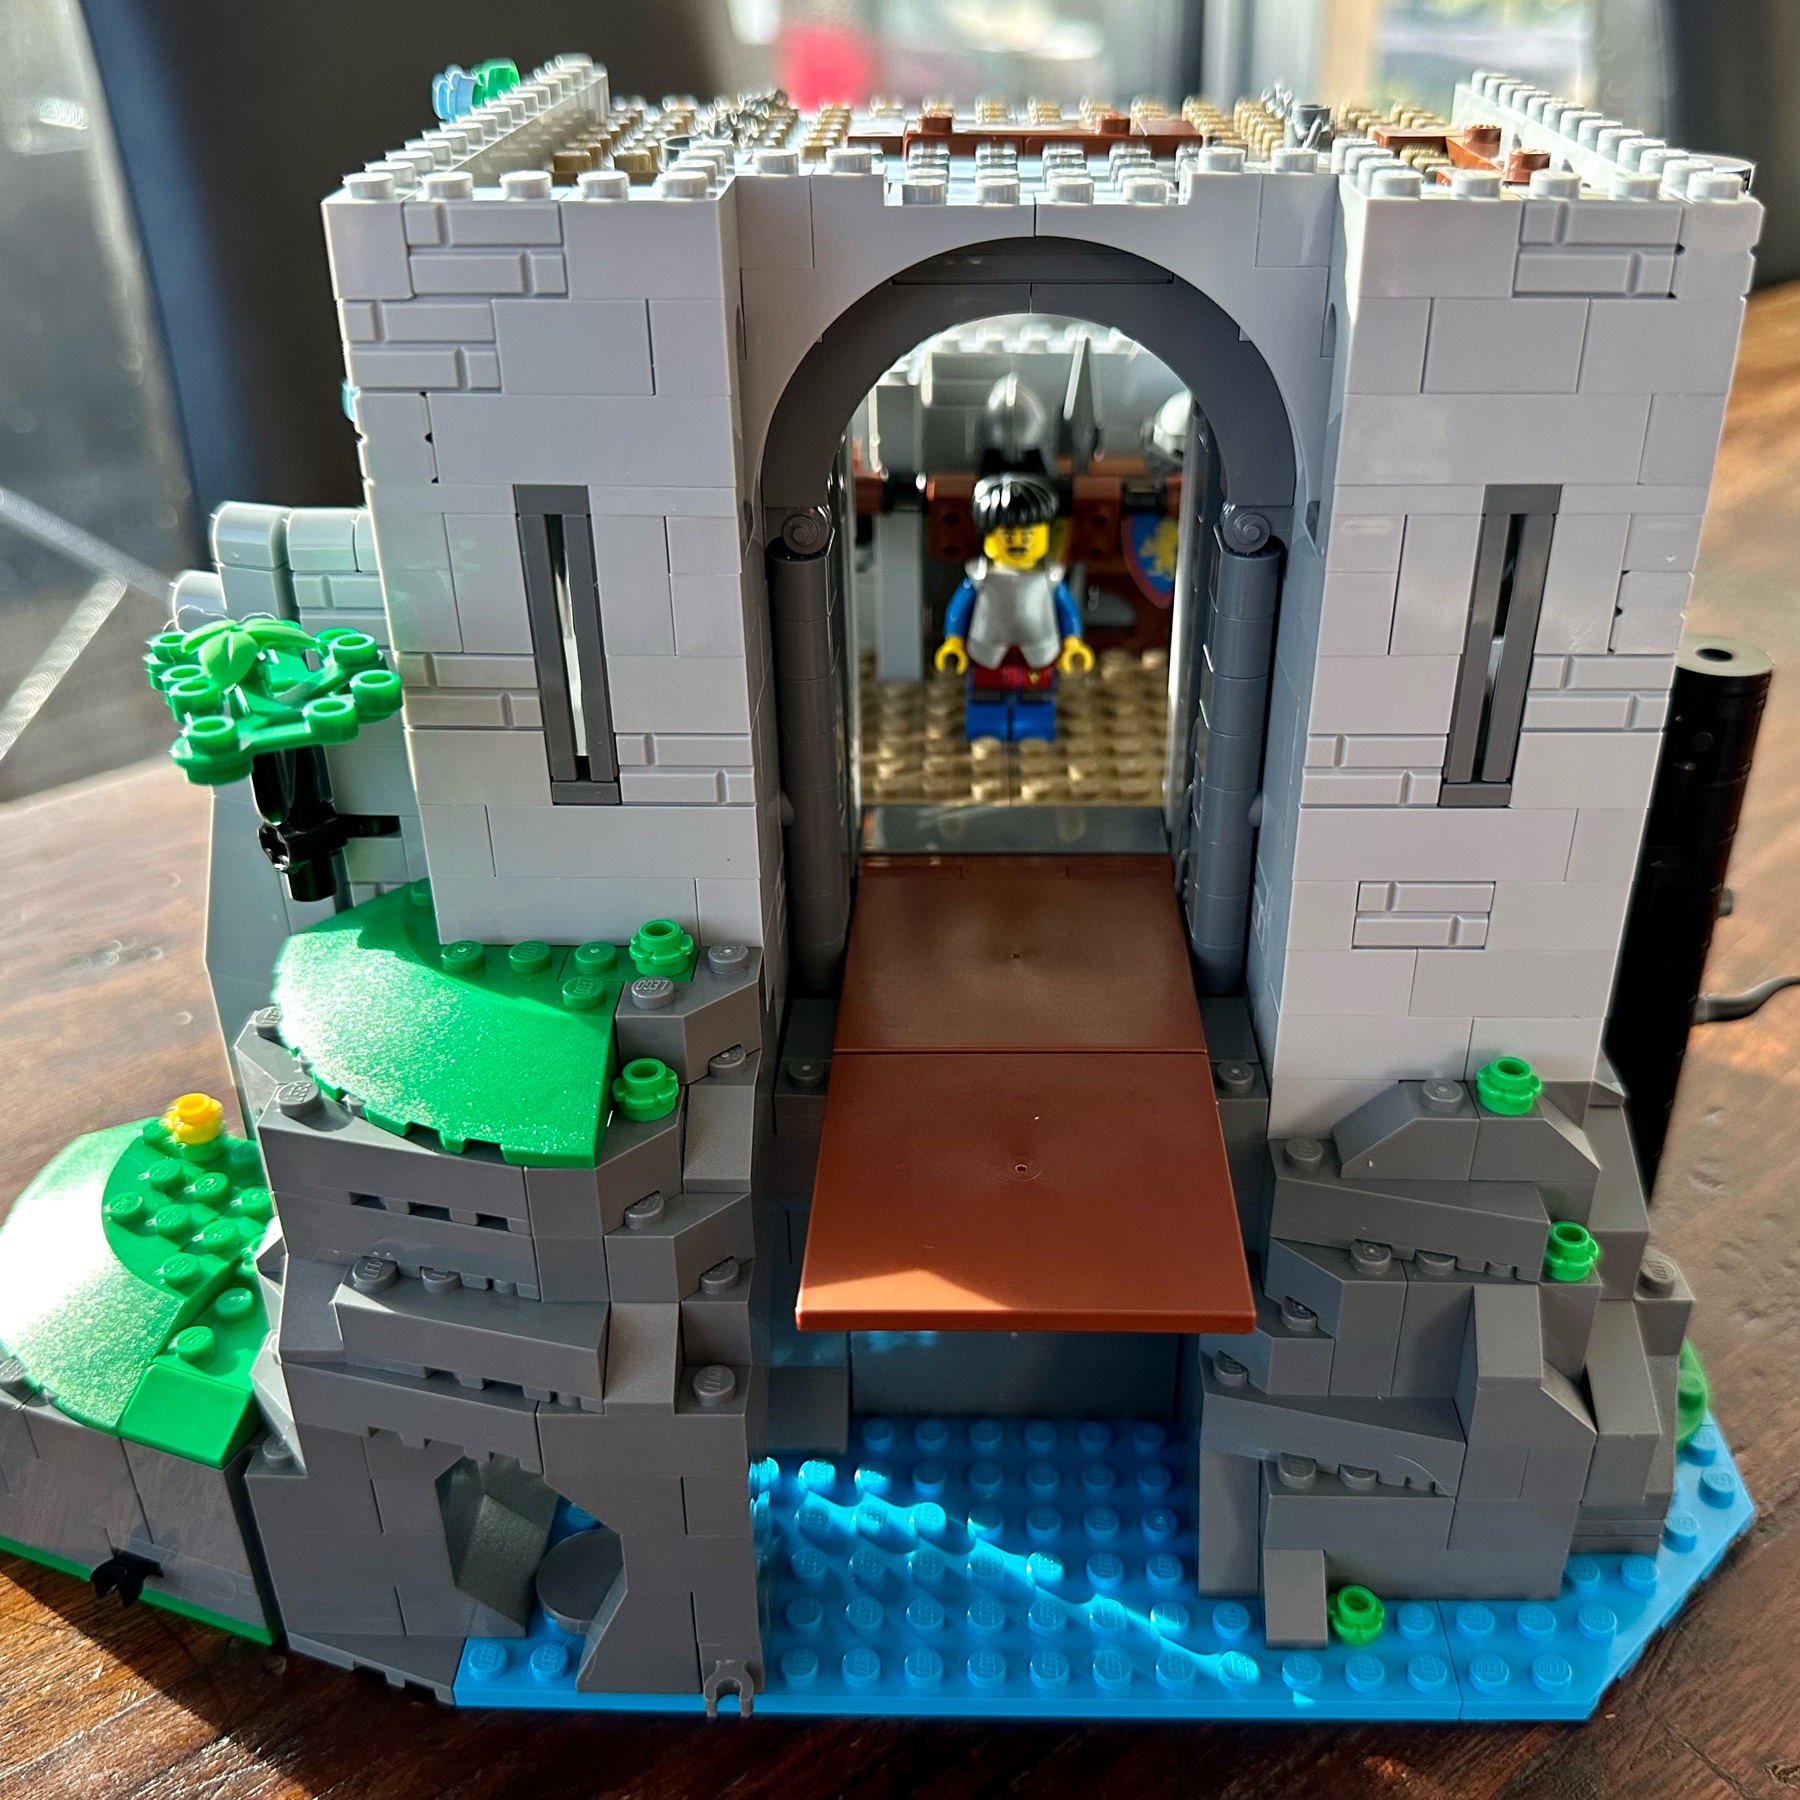 LEGO Castle exterior front view with drawbridge lowered and a guard standing in the doorway.